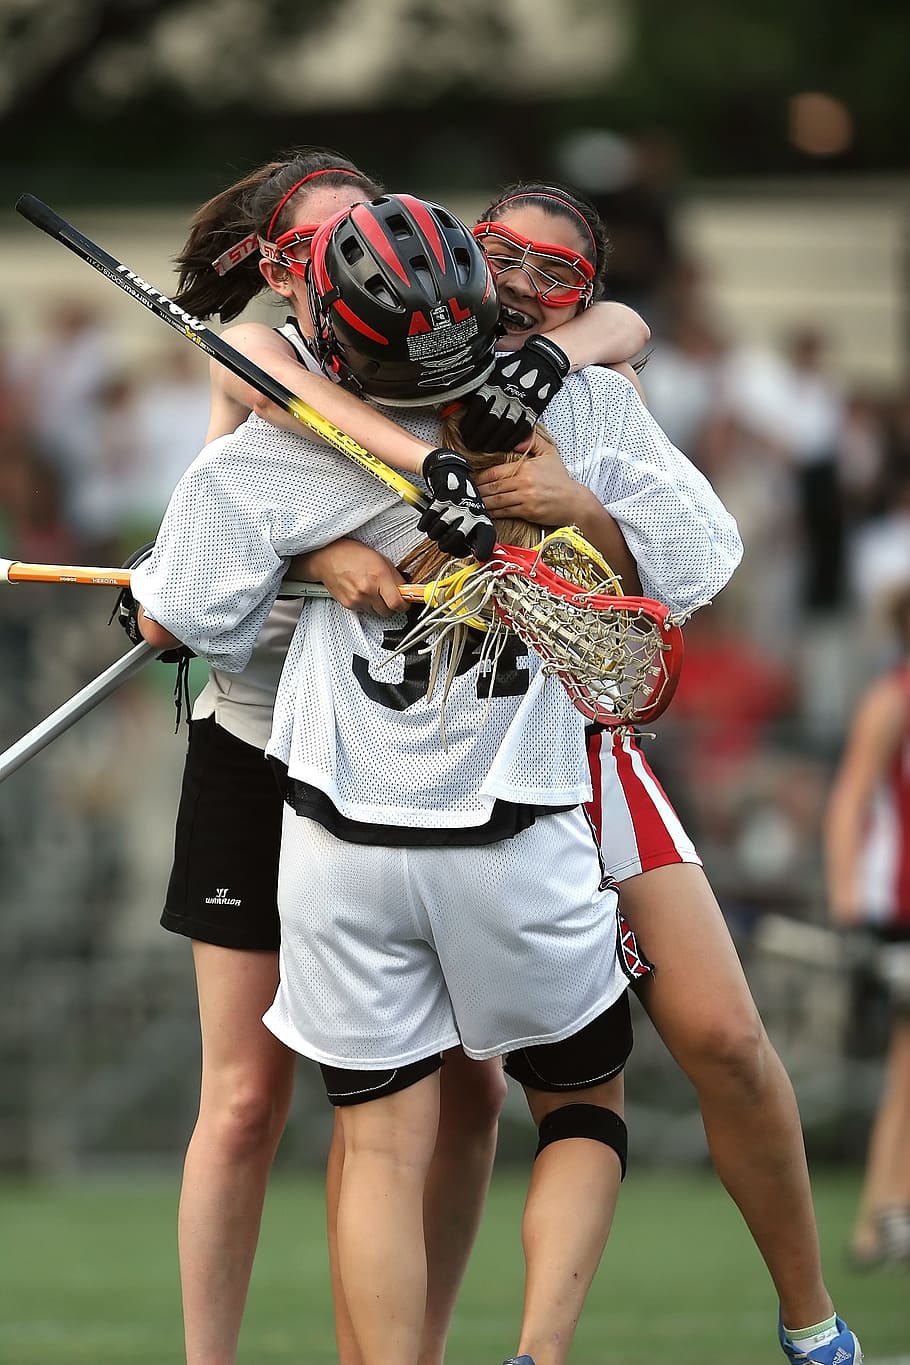 three, people, hugging, daytime, lacrosse, lax, sport, stick, equipment, competition